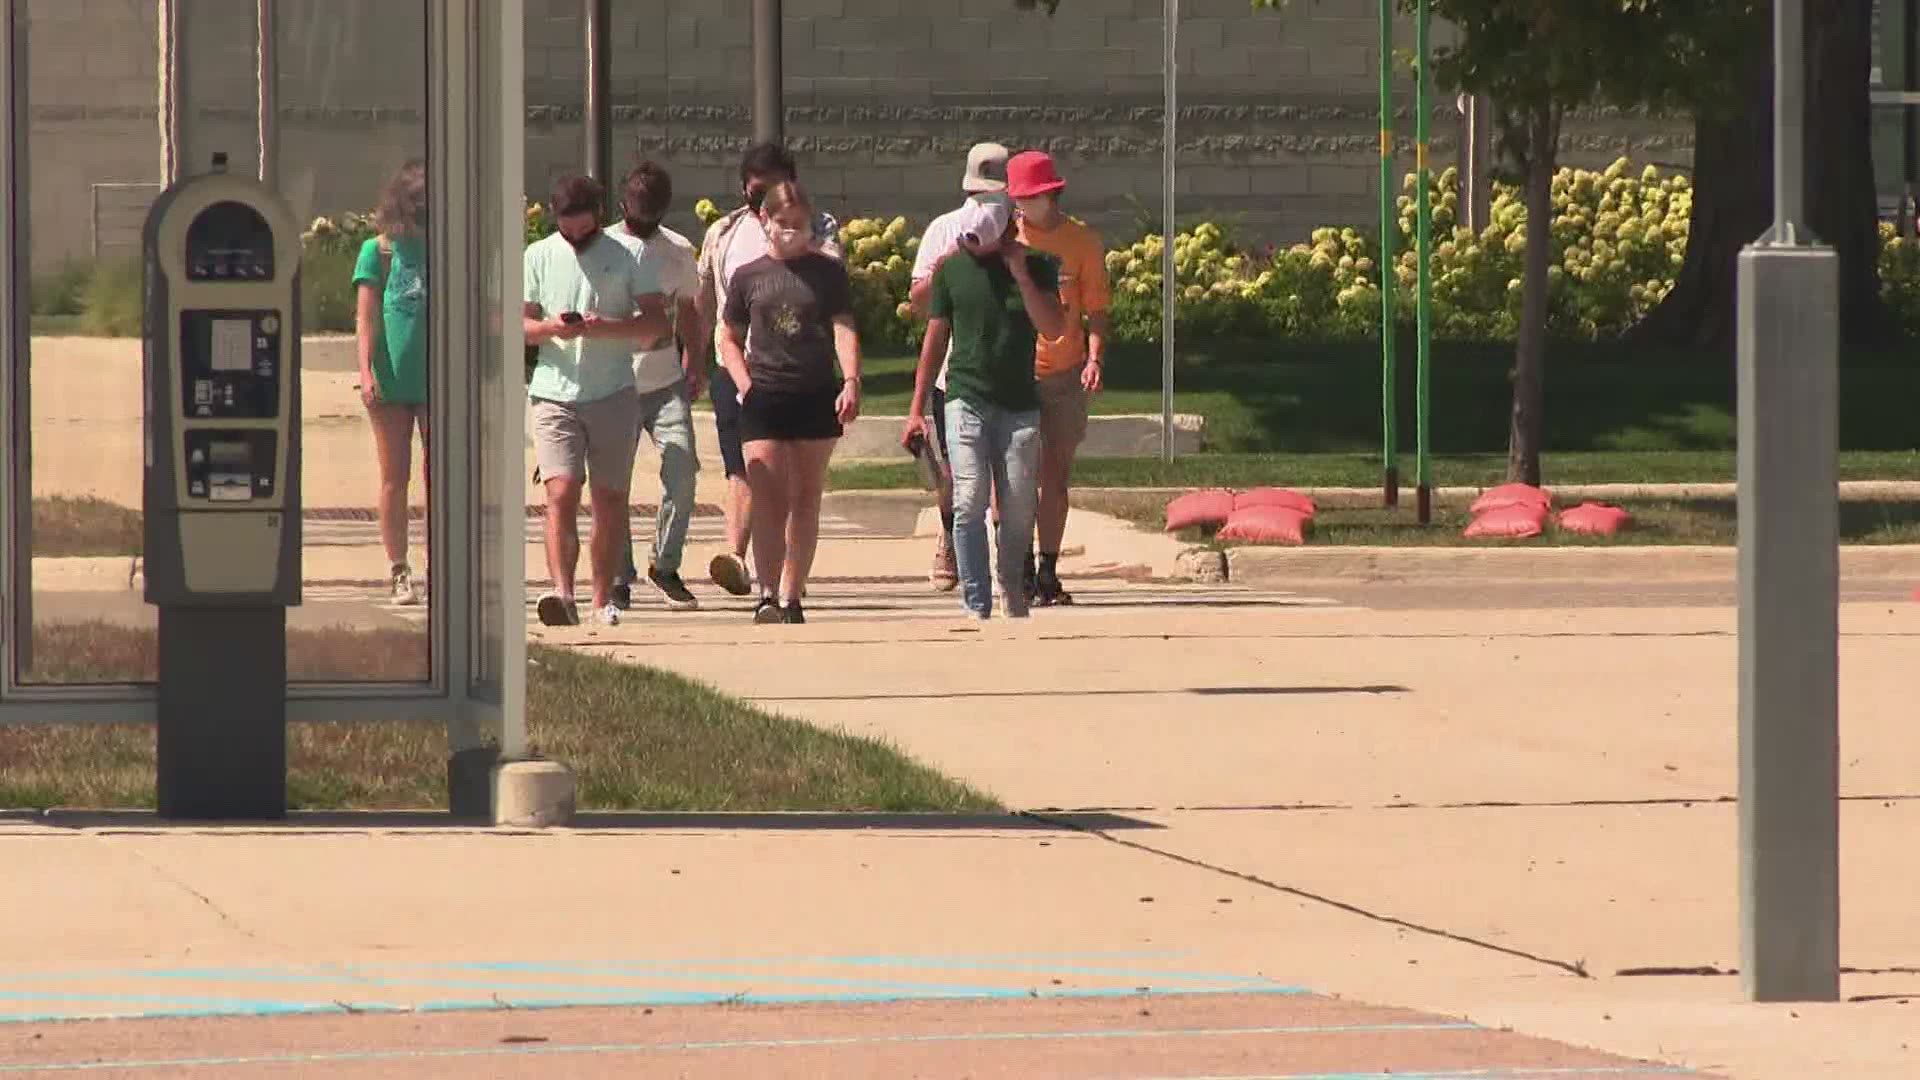 Michigan State University is encouraging students to stay home this fall because of COVID-19.